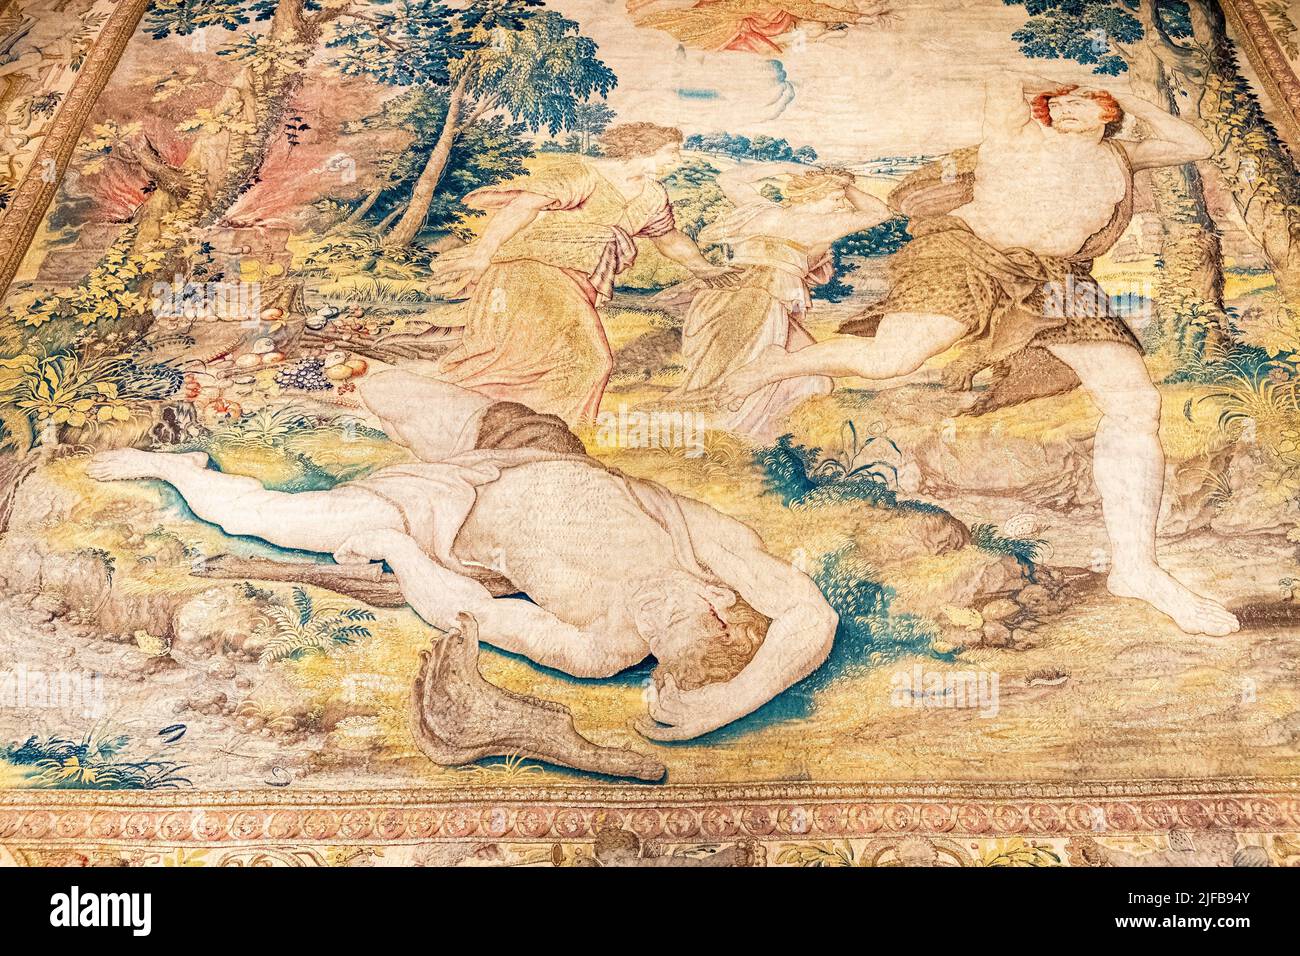 Poland, Lesser Poland, Krakow, listed as World Heritage by UNESCO, Wawel Castle on Royal Hill, exhibition the Royal Tapestries of Sigismund II Augustus from the workshops of Brussels, mid 1500, Cain fleeing the wrath of God Stock Photo